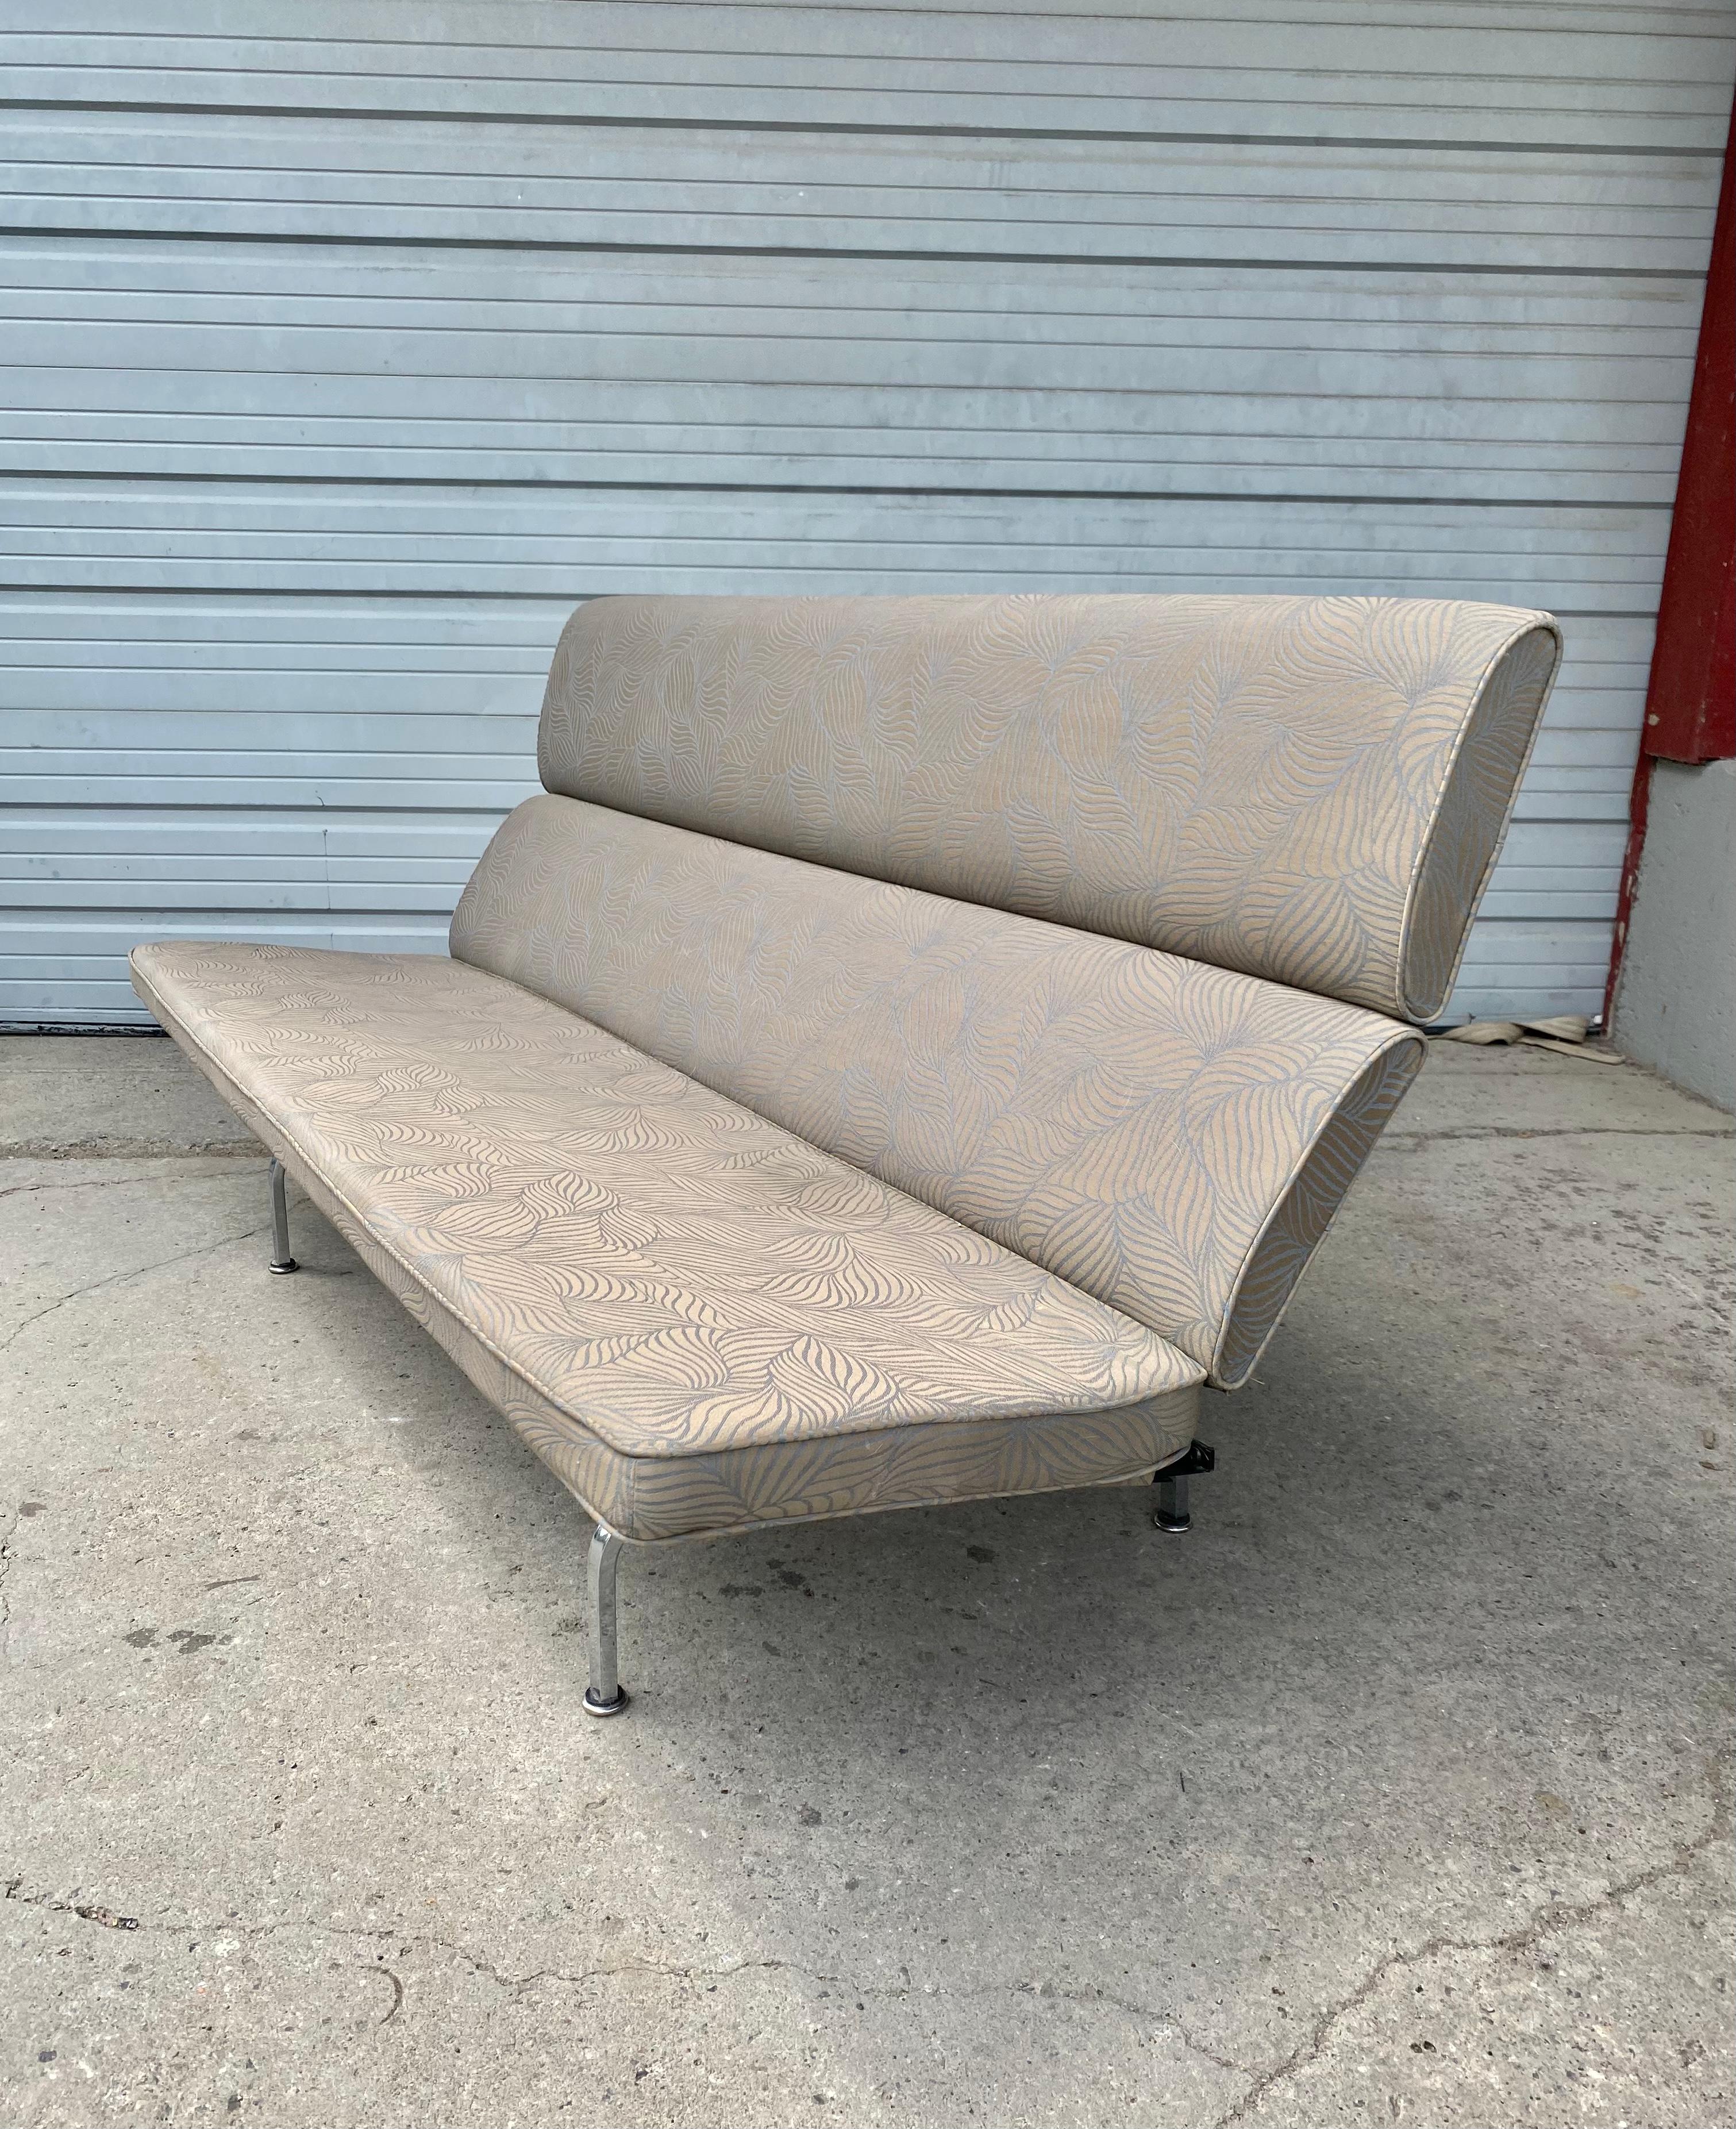 Up for offer is this original Ray and Charles Eames for Herman Miller iconic Compact sofa. Classic modernist design, Retains original Herman Miller label. This sofa retains a low profile and an ergonomic form while functionally supported by a steel